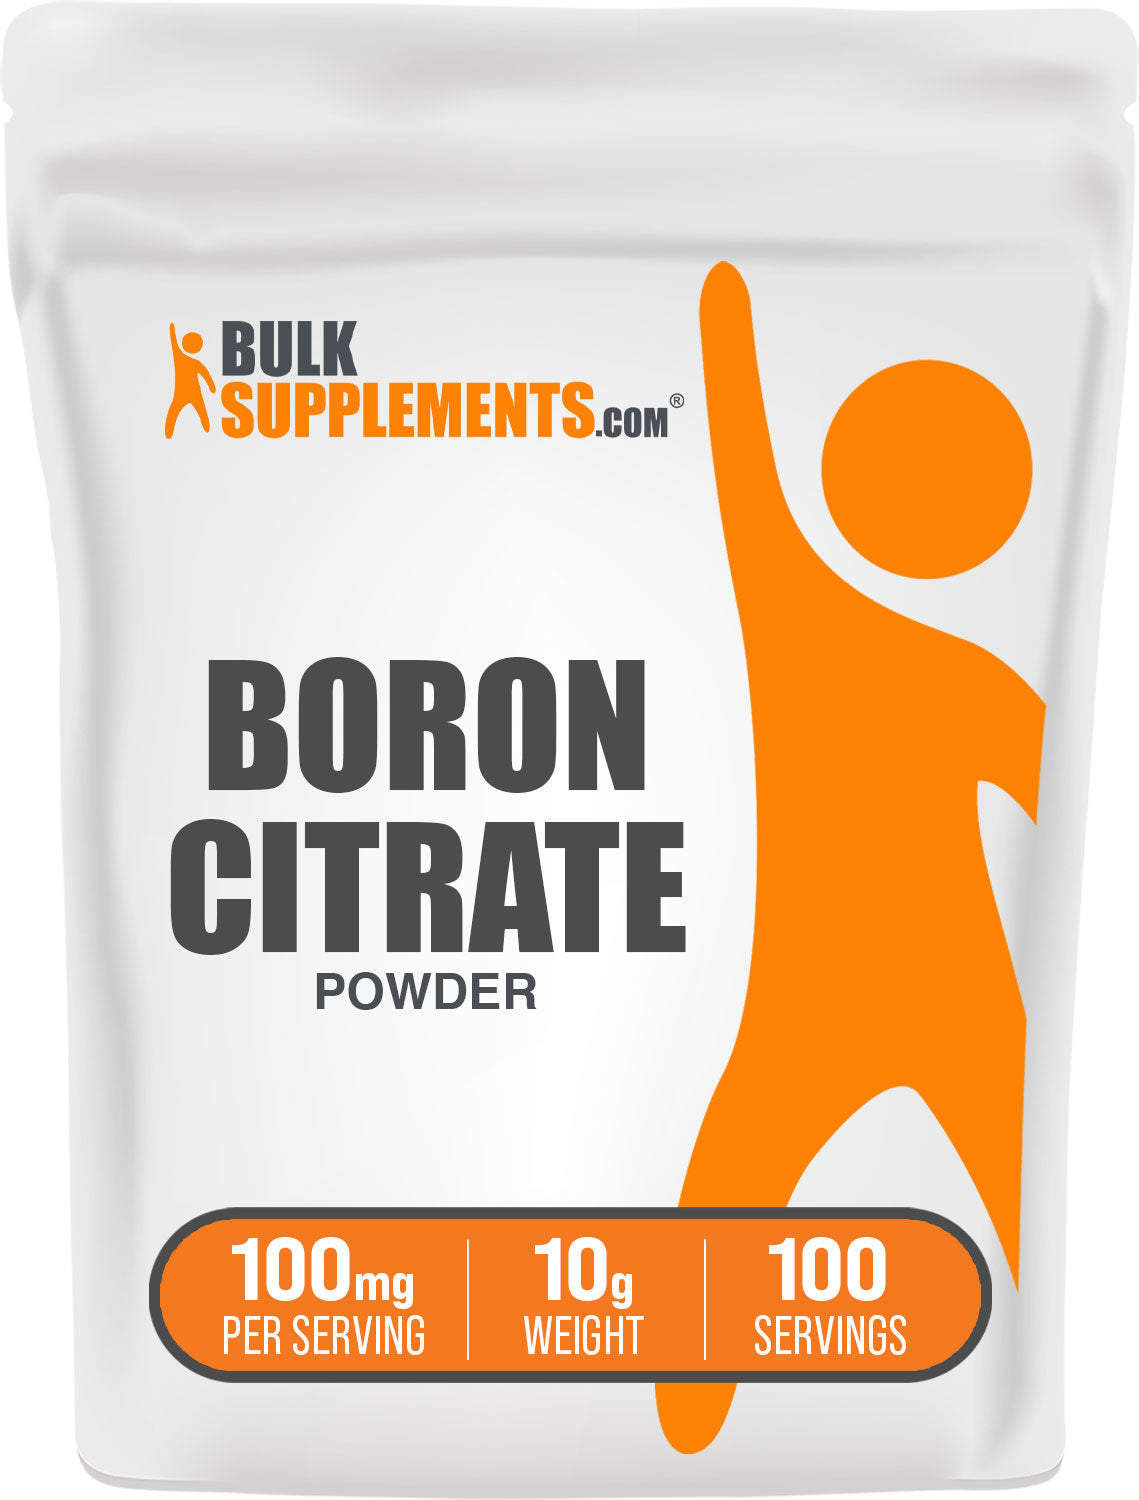 10g of boron citrate